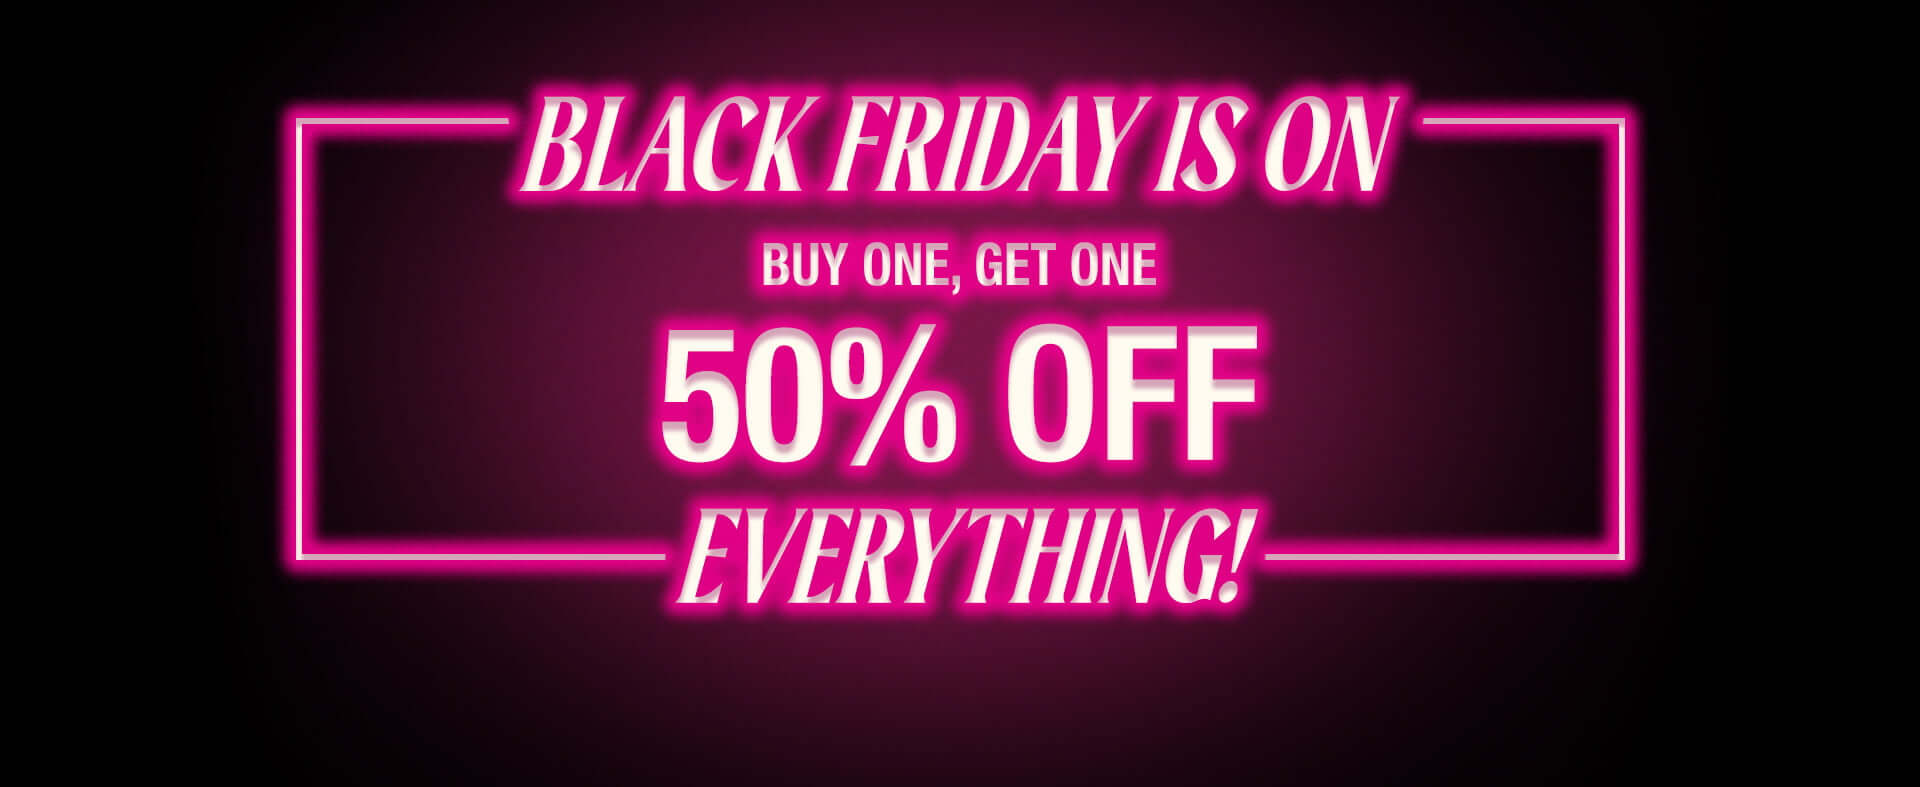 Black friday is on. Buy one, get one 50% off.